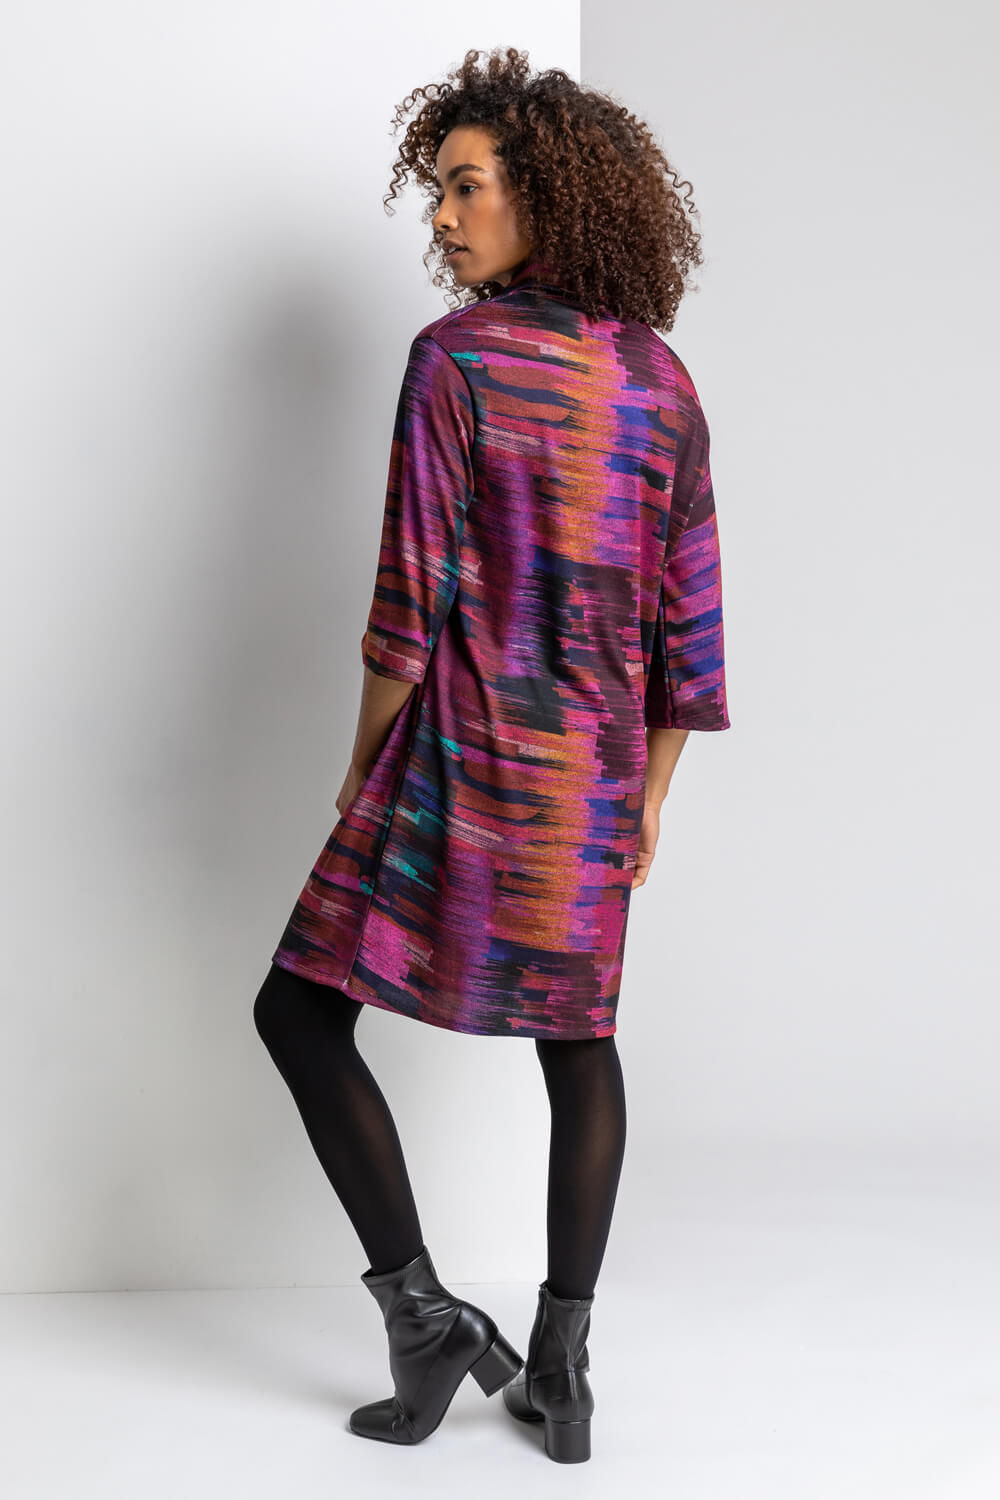 Purple Abstract Print Cowl Neck Dress, Image 3 of 4